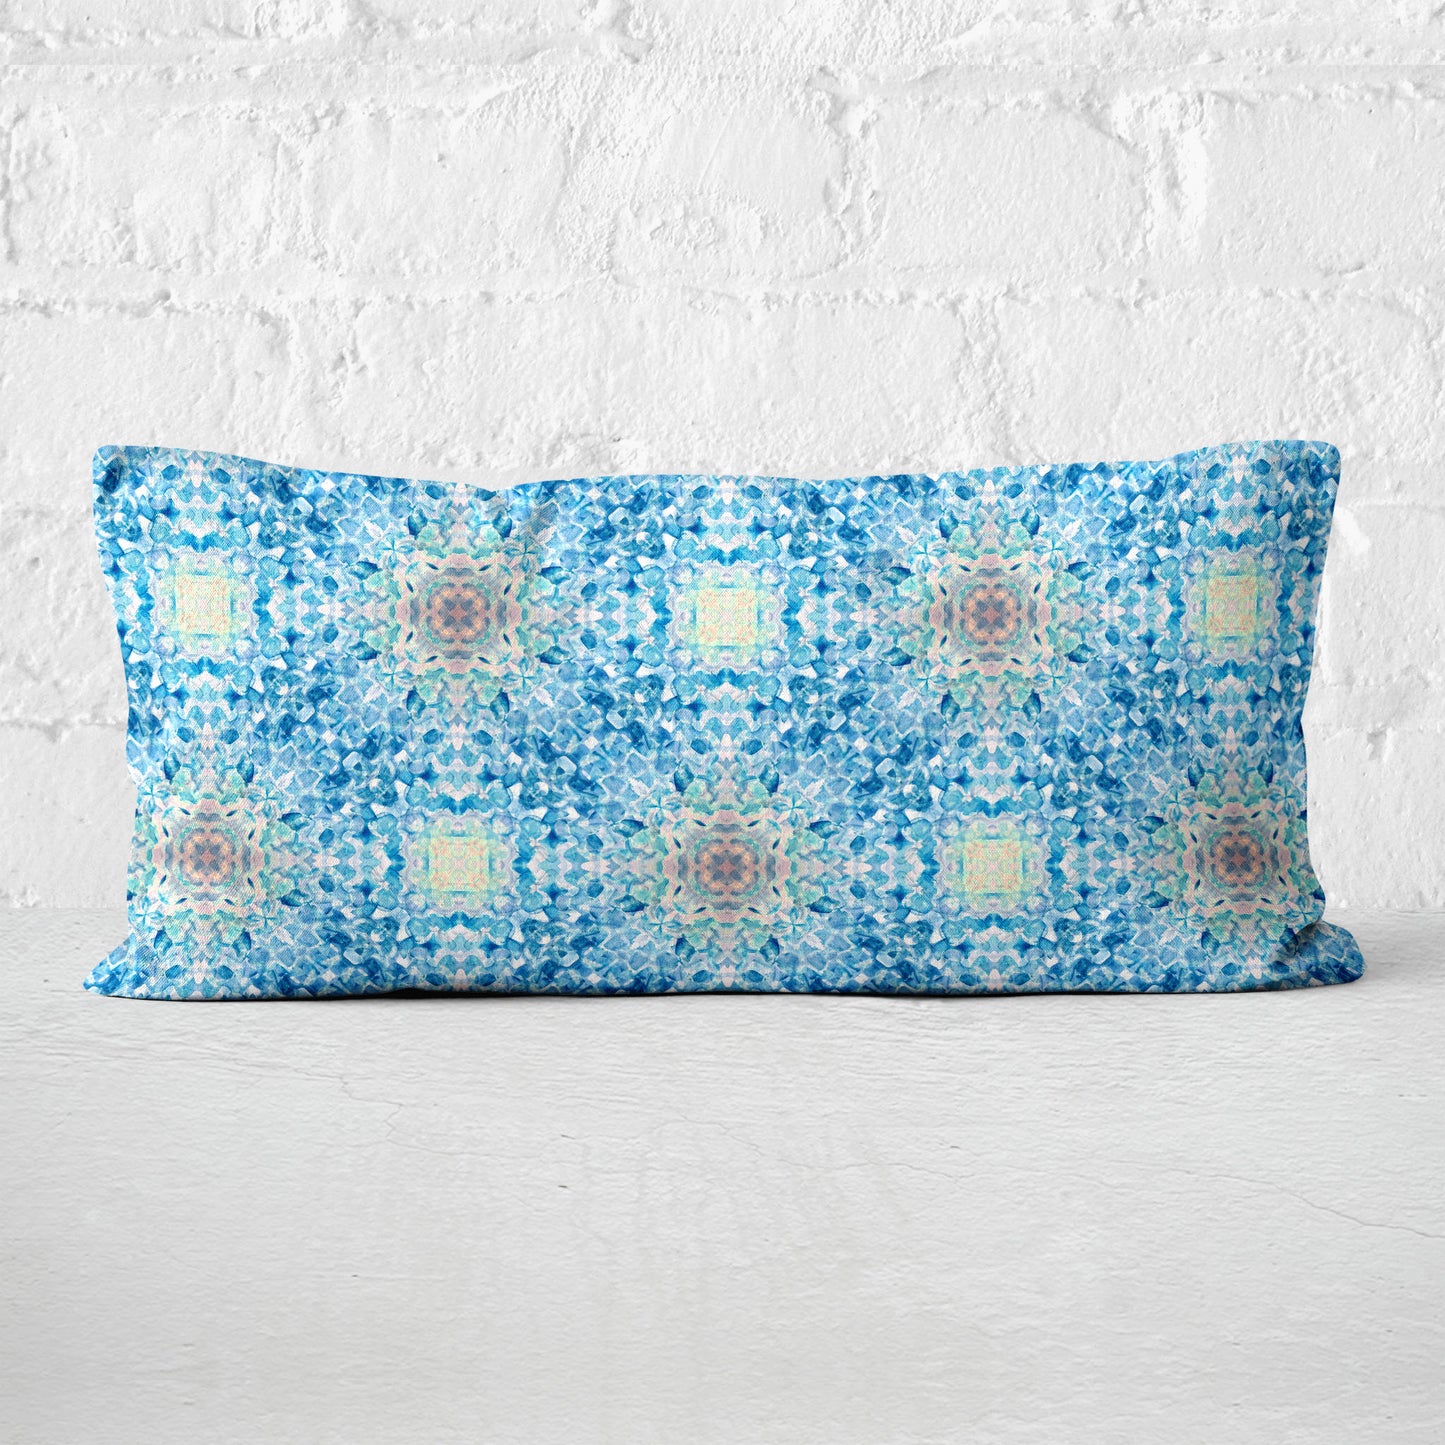 Rectangular lumbar pillow featuring a handpainted pattern in blue, pink, and yellow against a white brick wall.